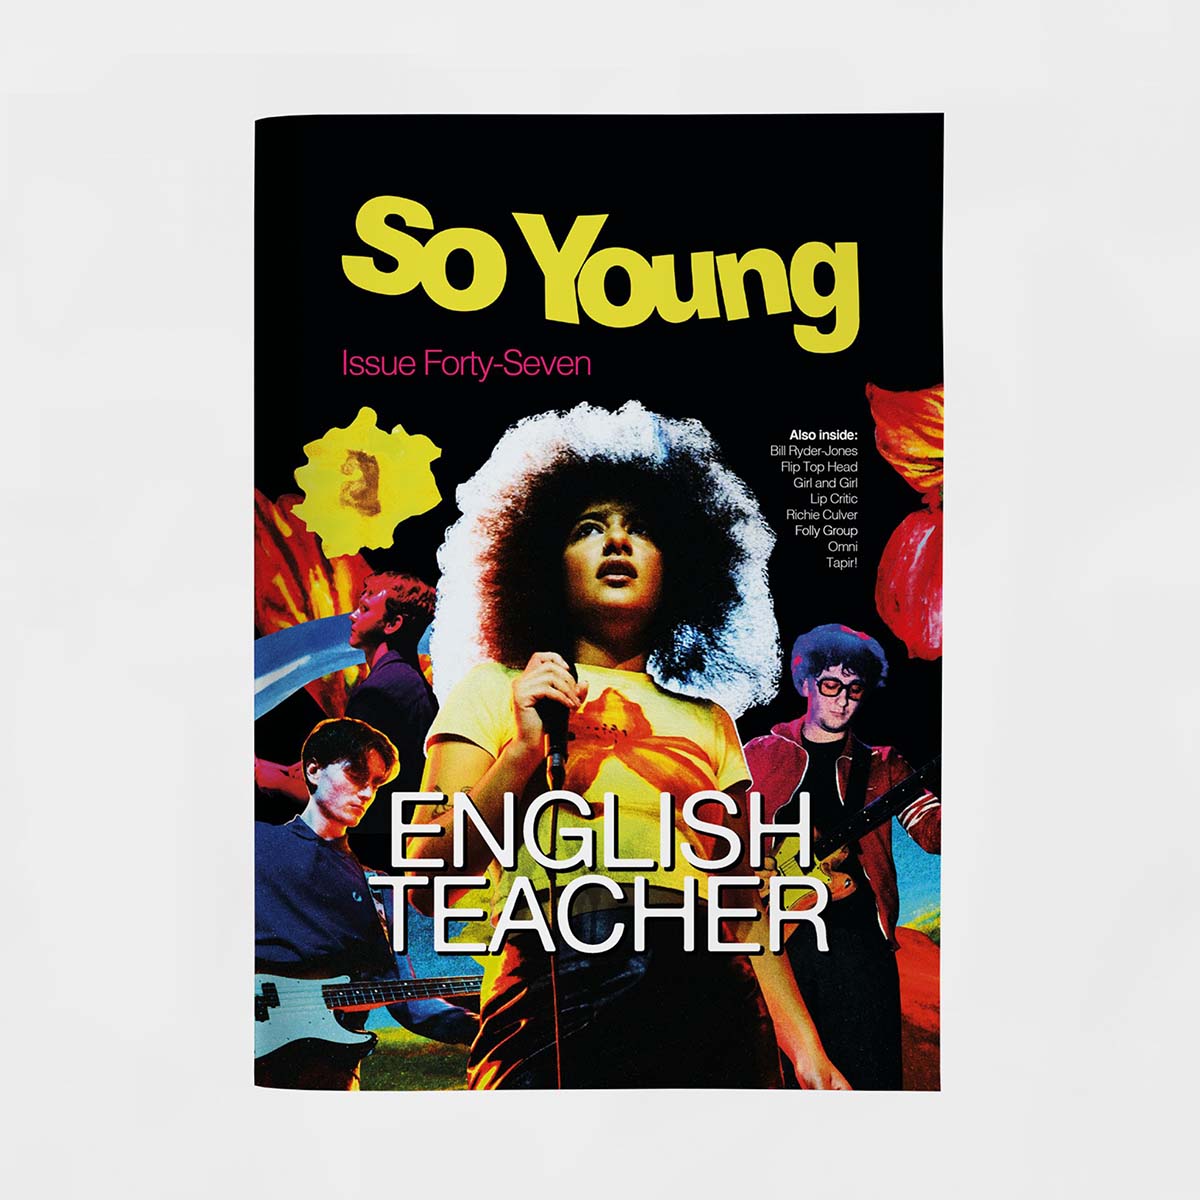 SO YOUNG 'ISSUE FORTY-SEVEN'